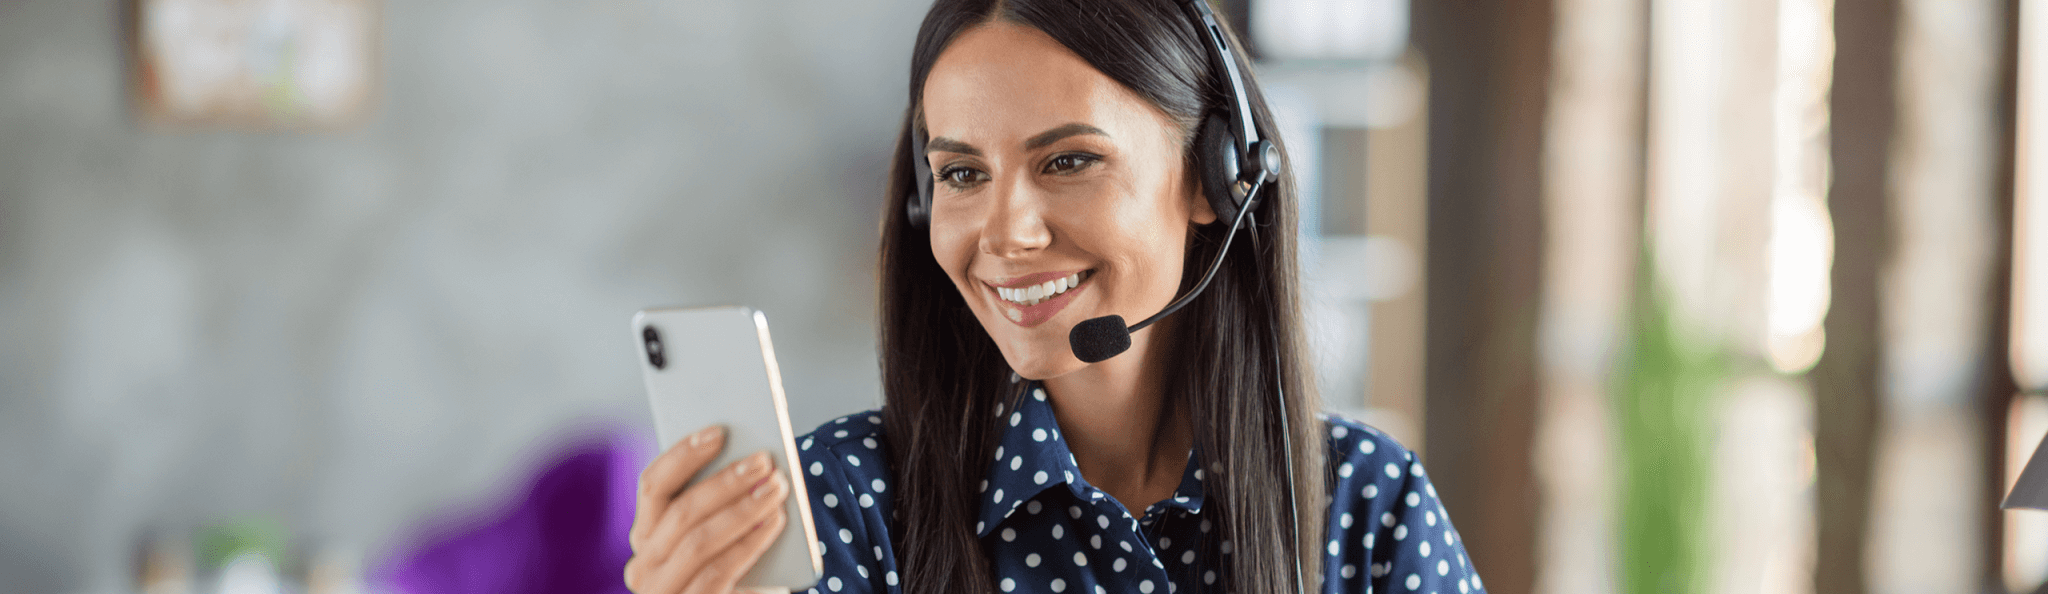 3 Reasons Your Contact Center Should Use Text Messaging Software + 3 Steps to Take to Make the Upgrade